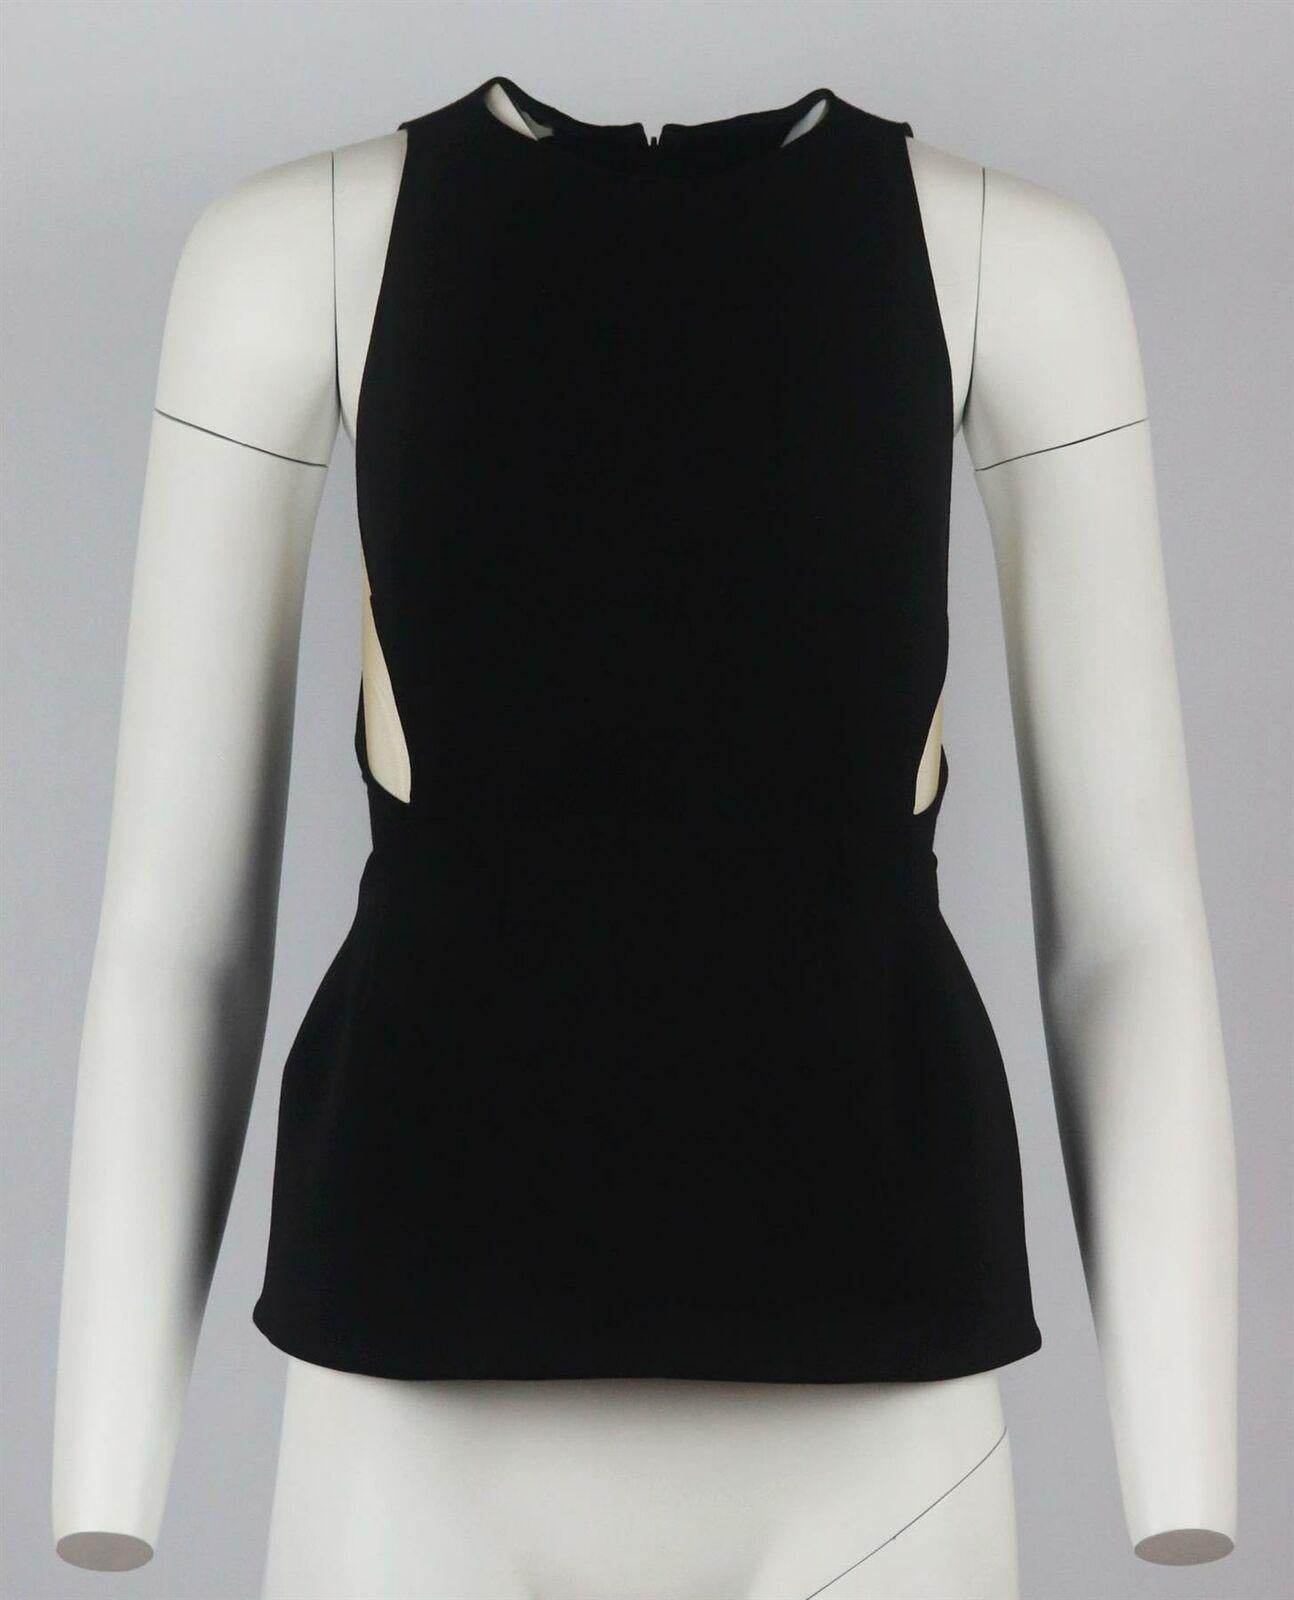 This top by Stella McCartney has a stretch-crepe bodice that flares out to a peplum silhouette with elegant layers of nude tulle at the sides.
Black stretch-crepe, nude tulle.
Concealed zip fastening at back.
34% Viscose, 34% polyamide, 24% wool, 8%